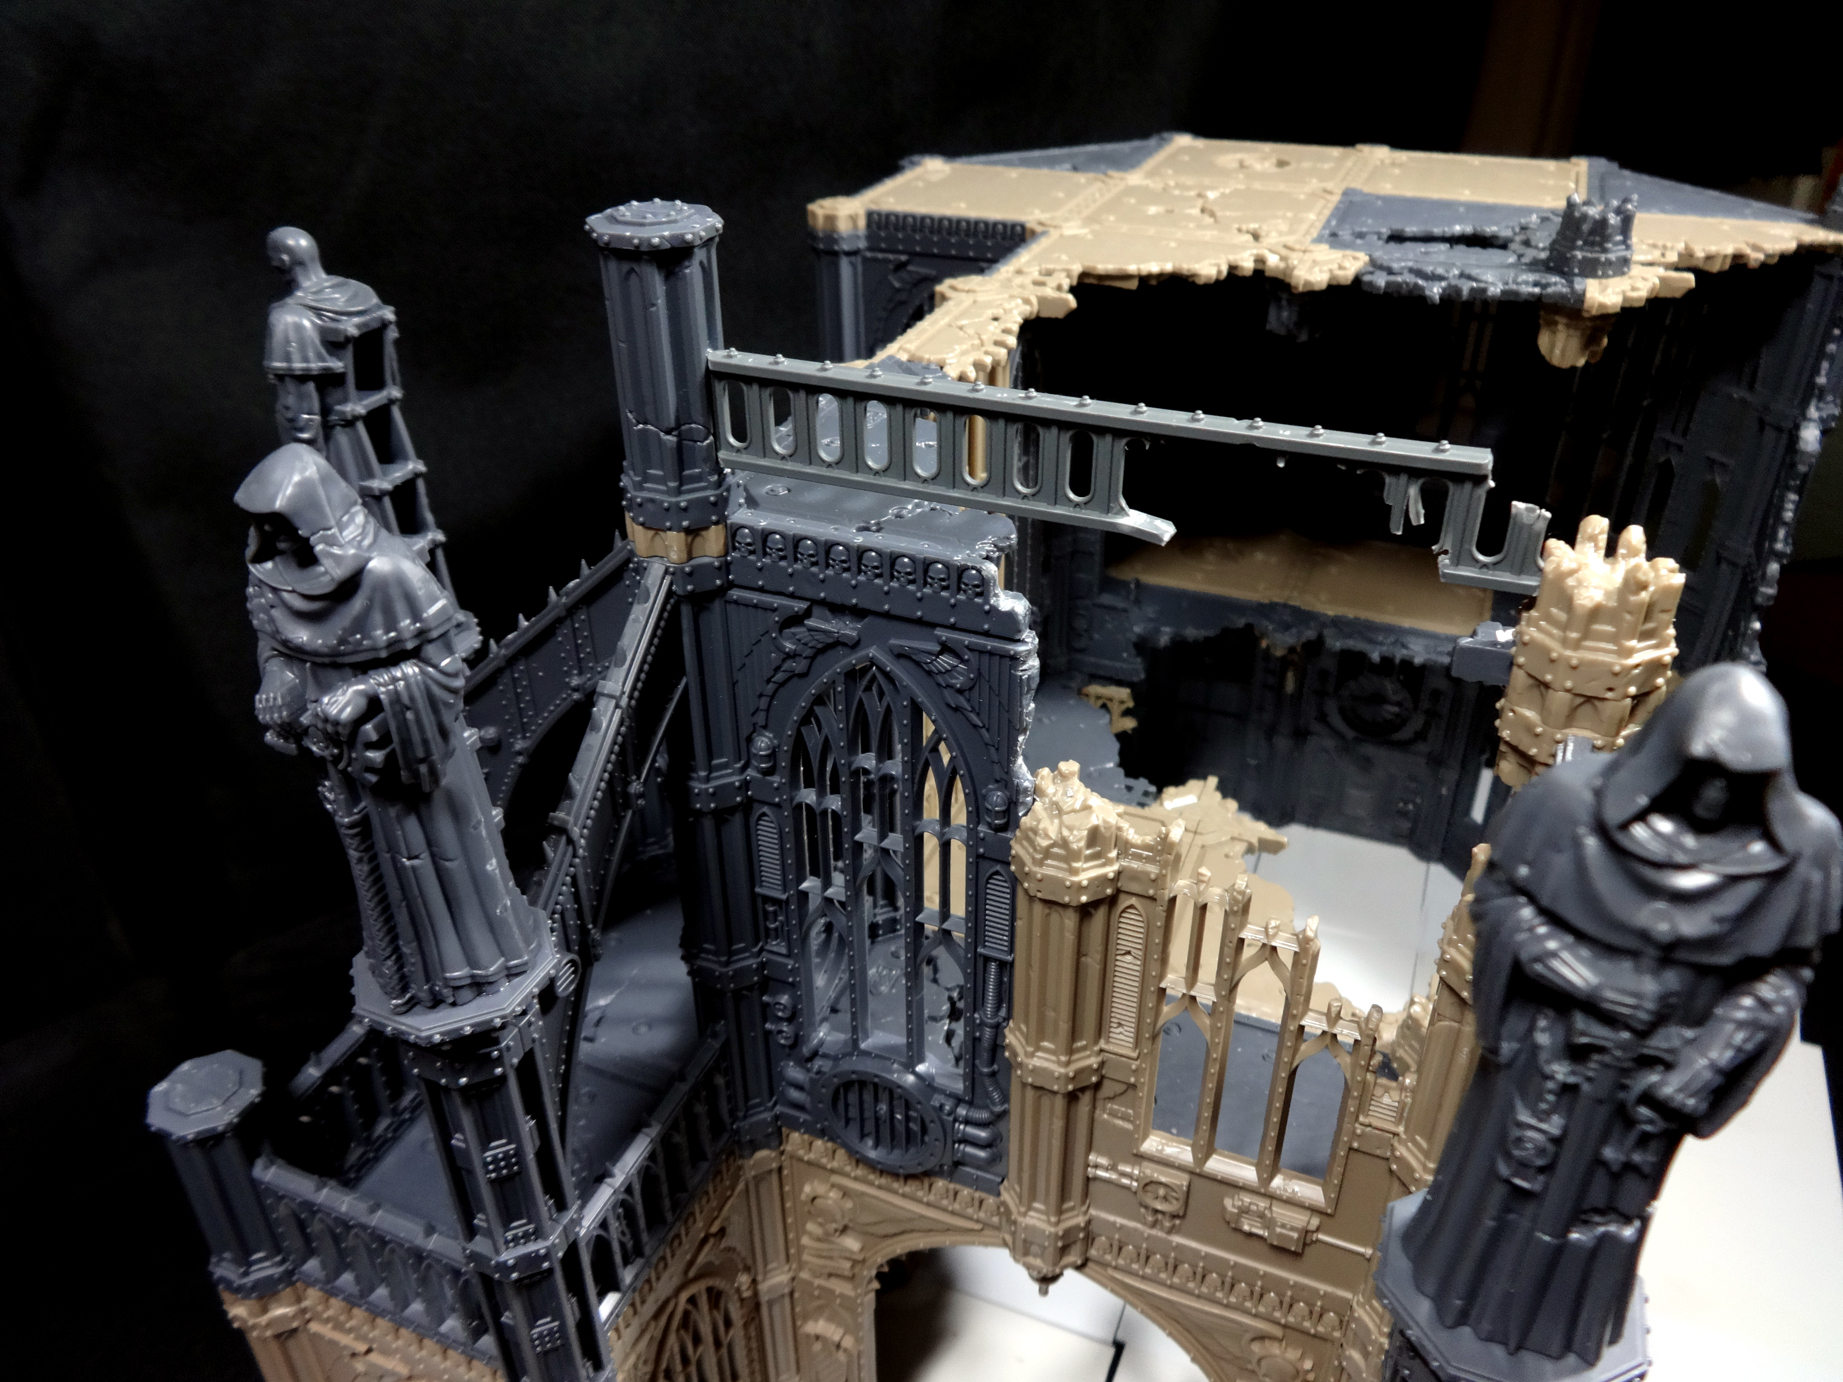 Sector Imperialis Terrain Build - Rapid Fire Wargaming